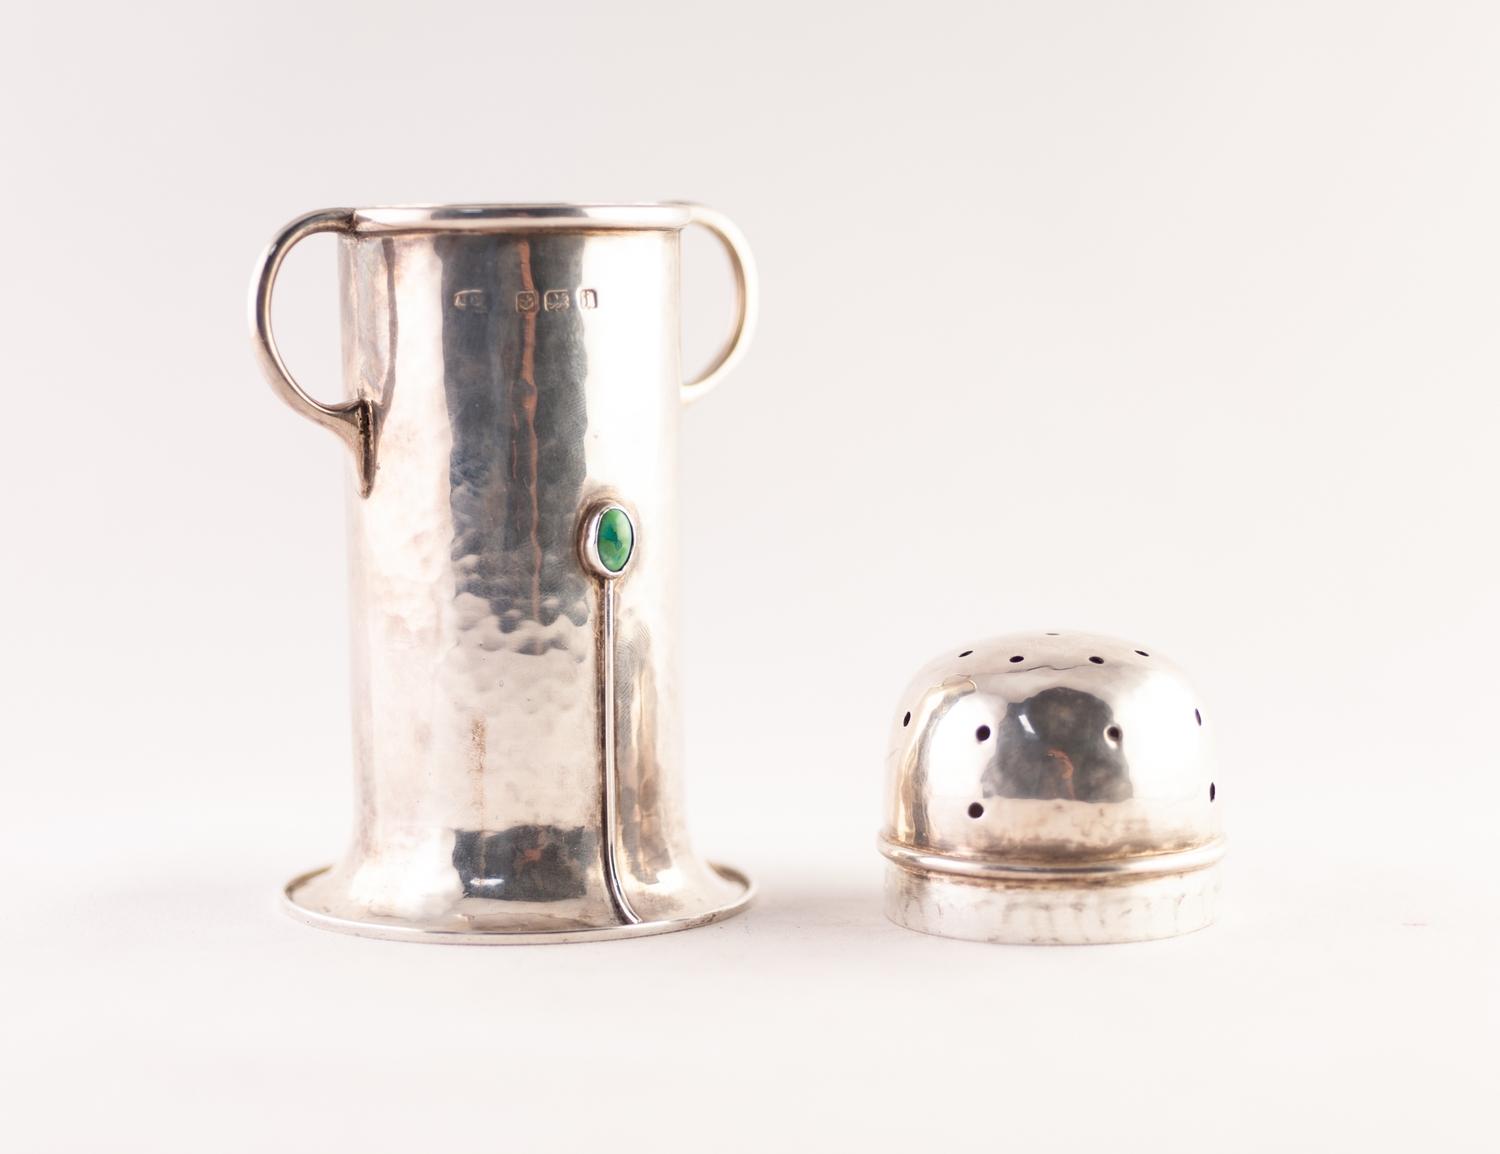 EDWARDIAN ARTS & CRAFTS PLANISHED SILVER TOW HANDLED SUGAR CASTOR OF LIGHTHOUSE PATTERN, with - Image 5 of 5